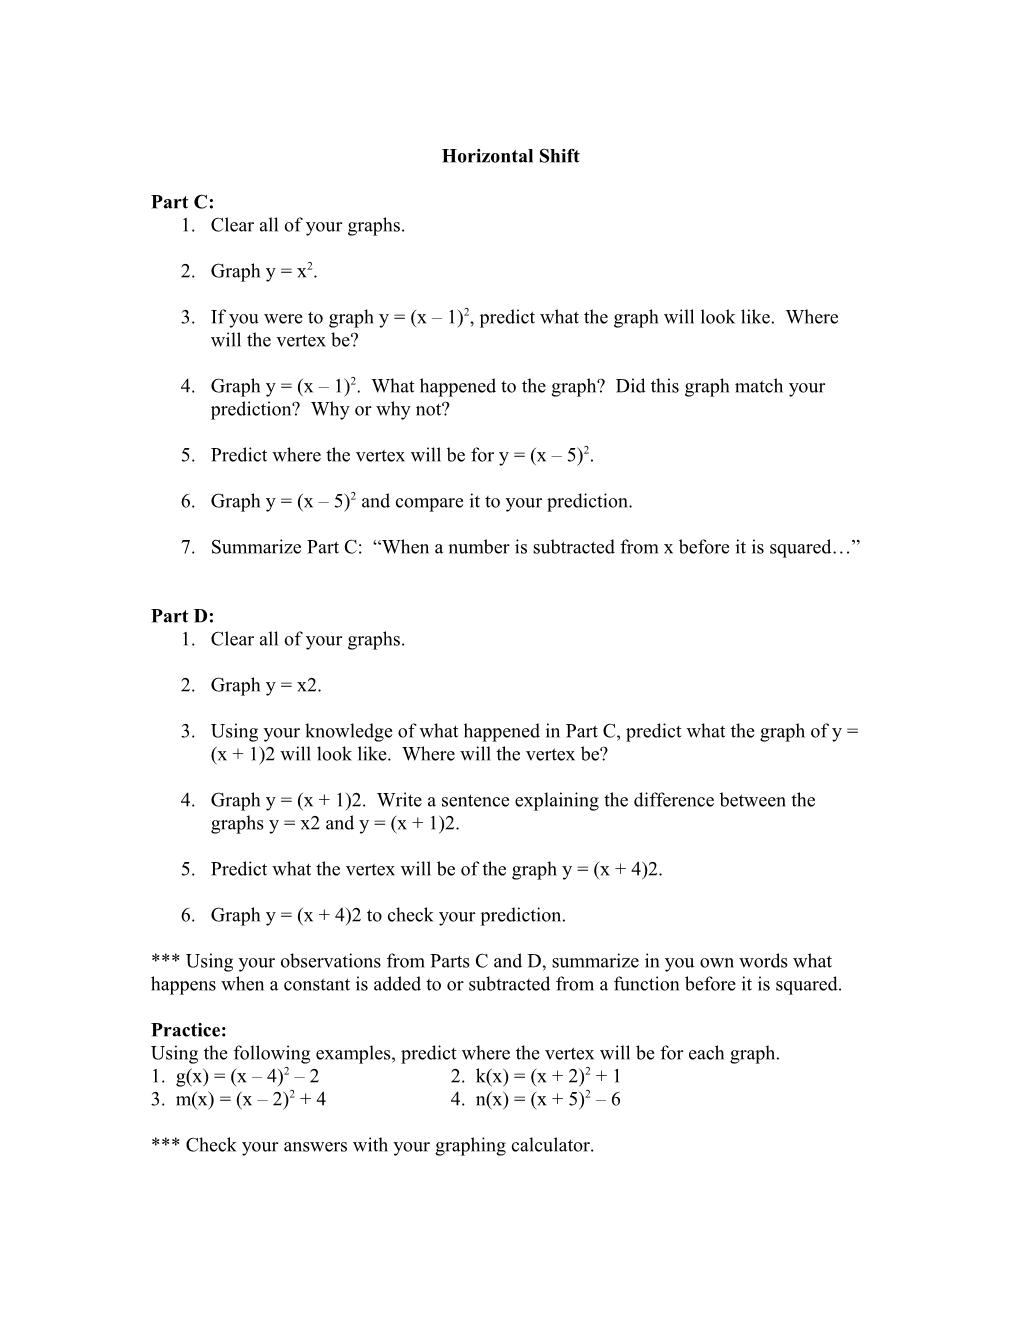 NOTE: This Worksheet Came from a Lesson in a Series of Lessons on Graphing Functions. It